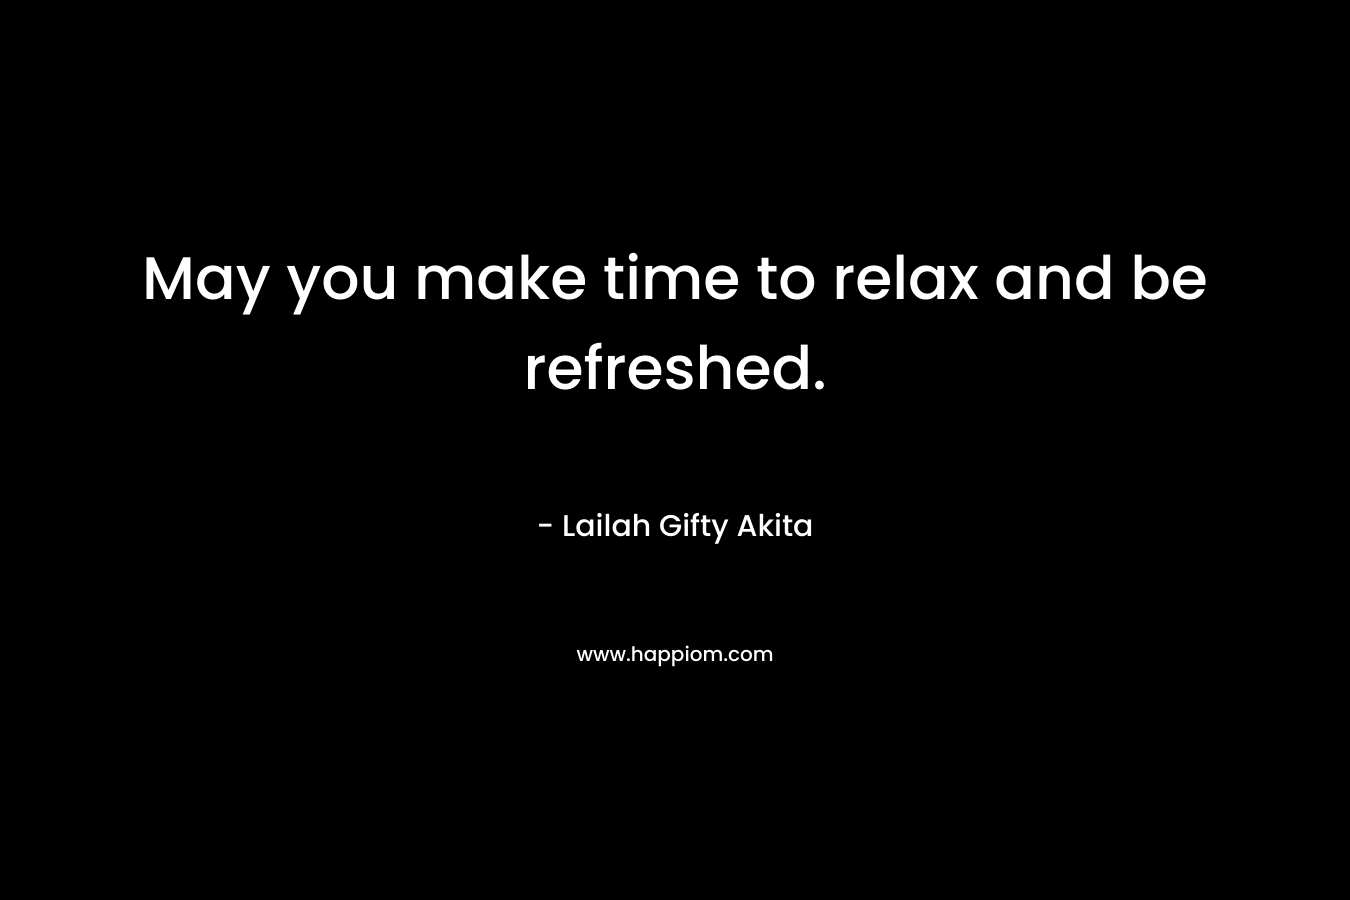 May you make time to relax and be refreshed. – Lailah Gifty Akita